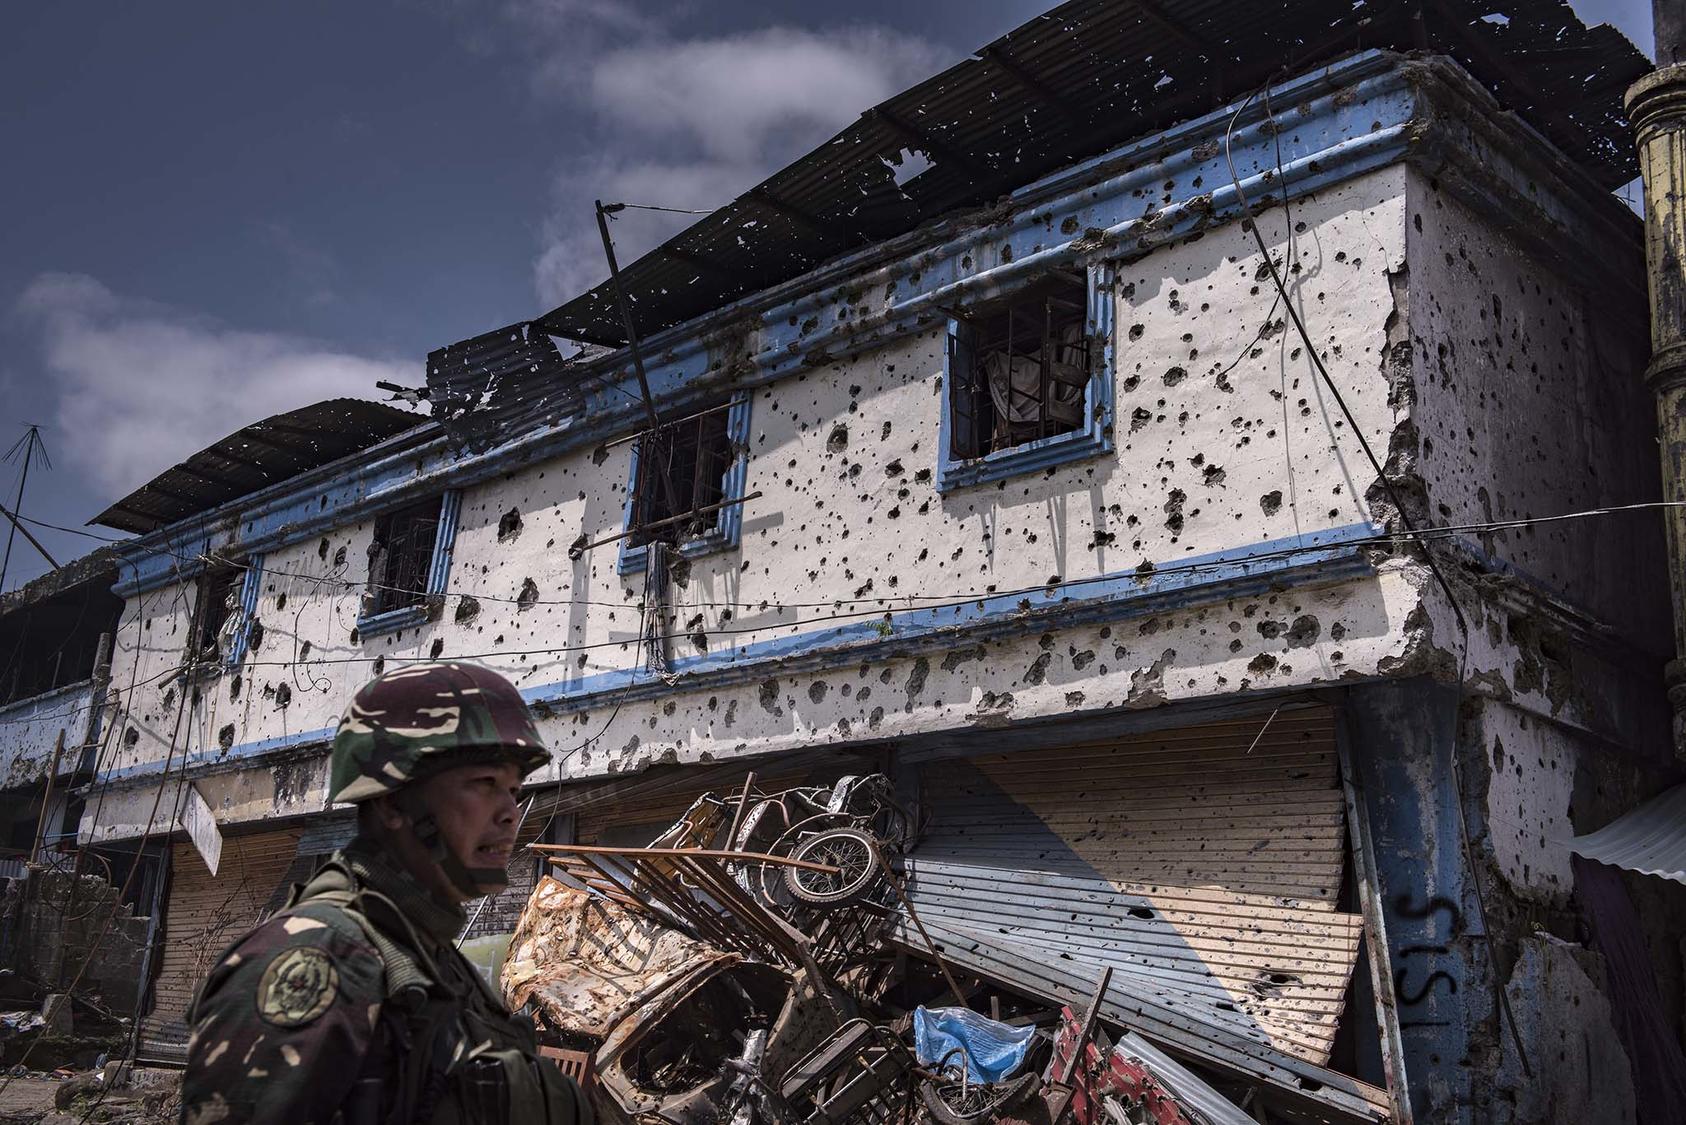 A government soldier outside a ruined building in Marawi, a city in the southern Philippines that was for months under the control of an affiliate of the Islamic State group, Aug. 30, 2017. (Jes Aznar/The New York Times)